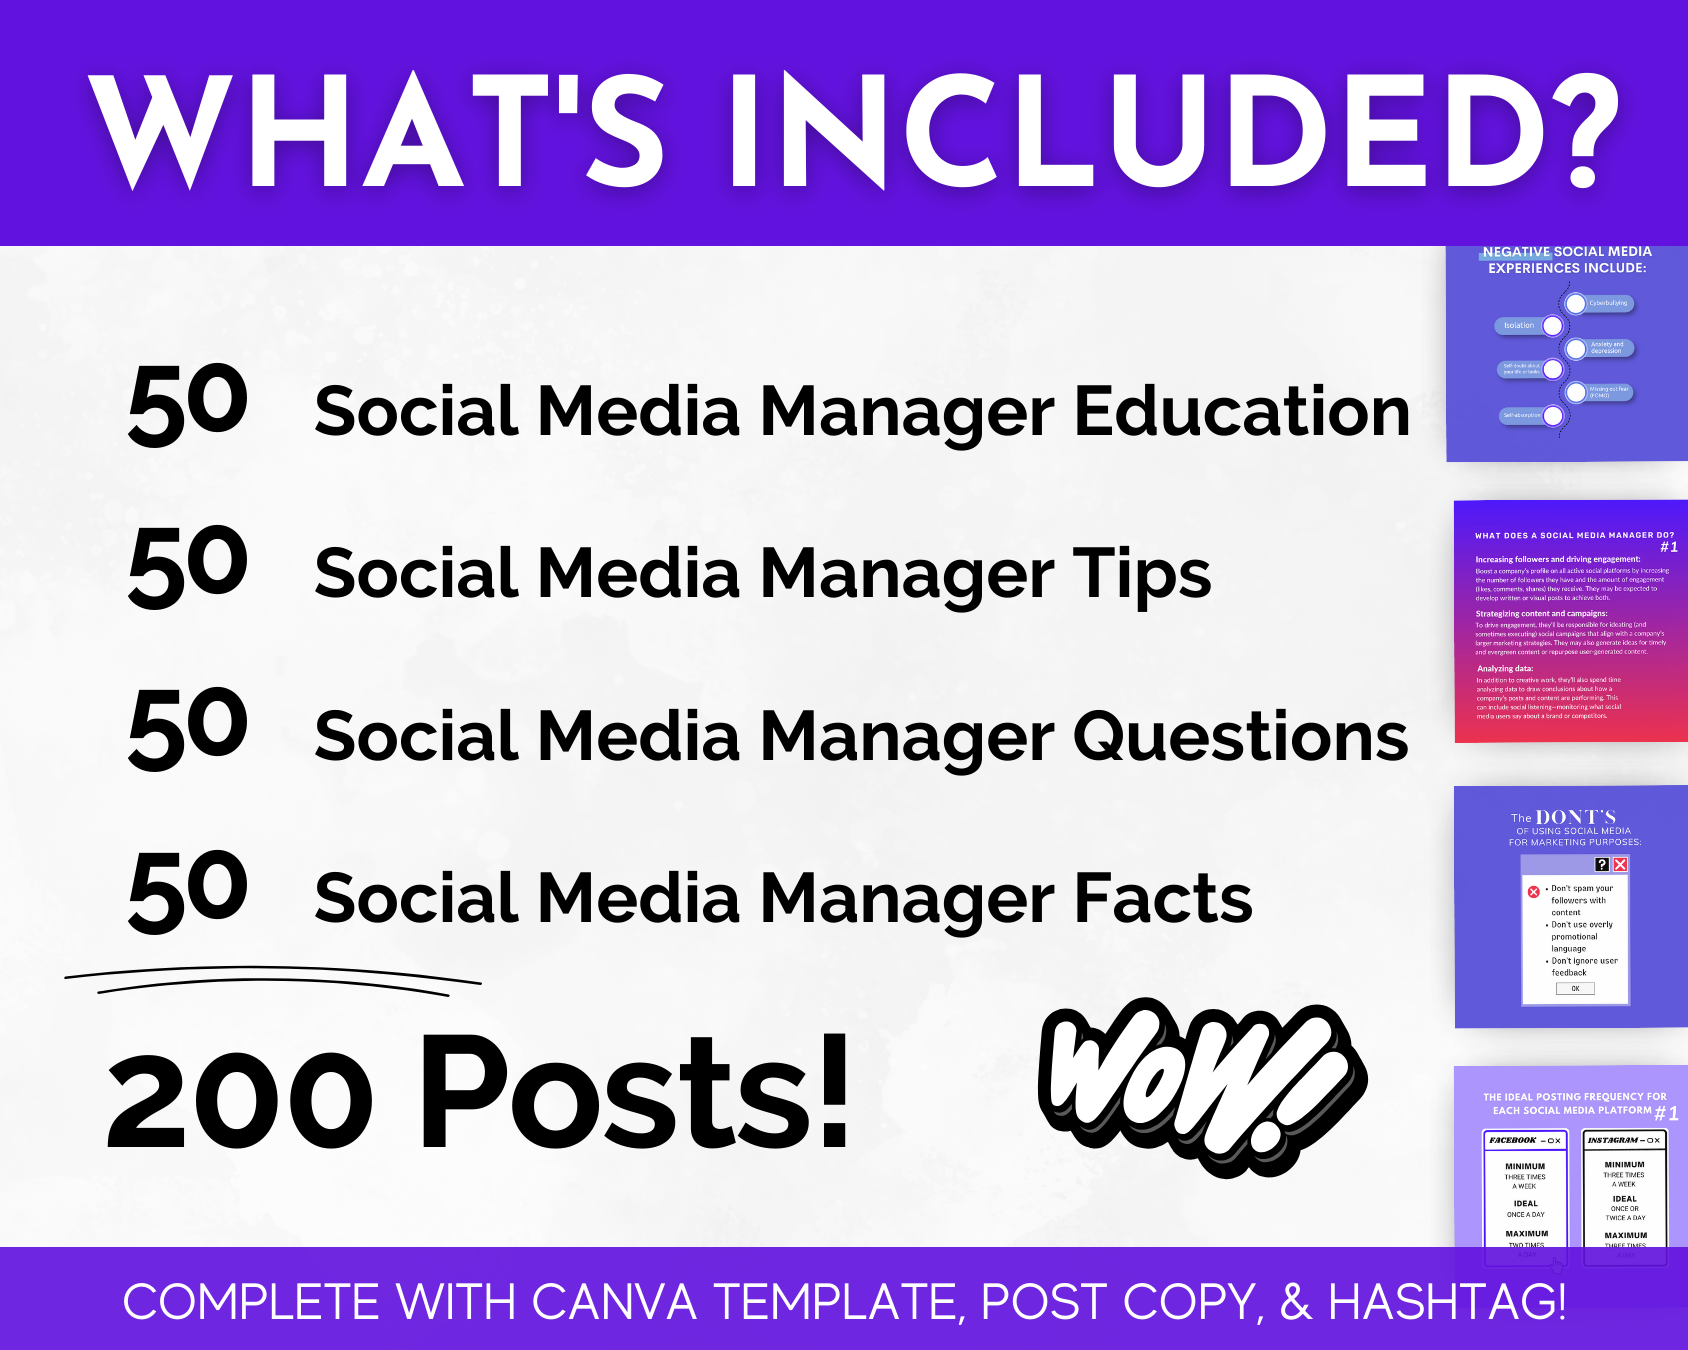 What's included in the Socially Inclined social media manager course? Learn from expert social media managers and access a comprehensive collection of Social Media Manager 200 Post Content Bundle with Canva Templates for creating engaging social media posts.